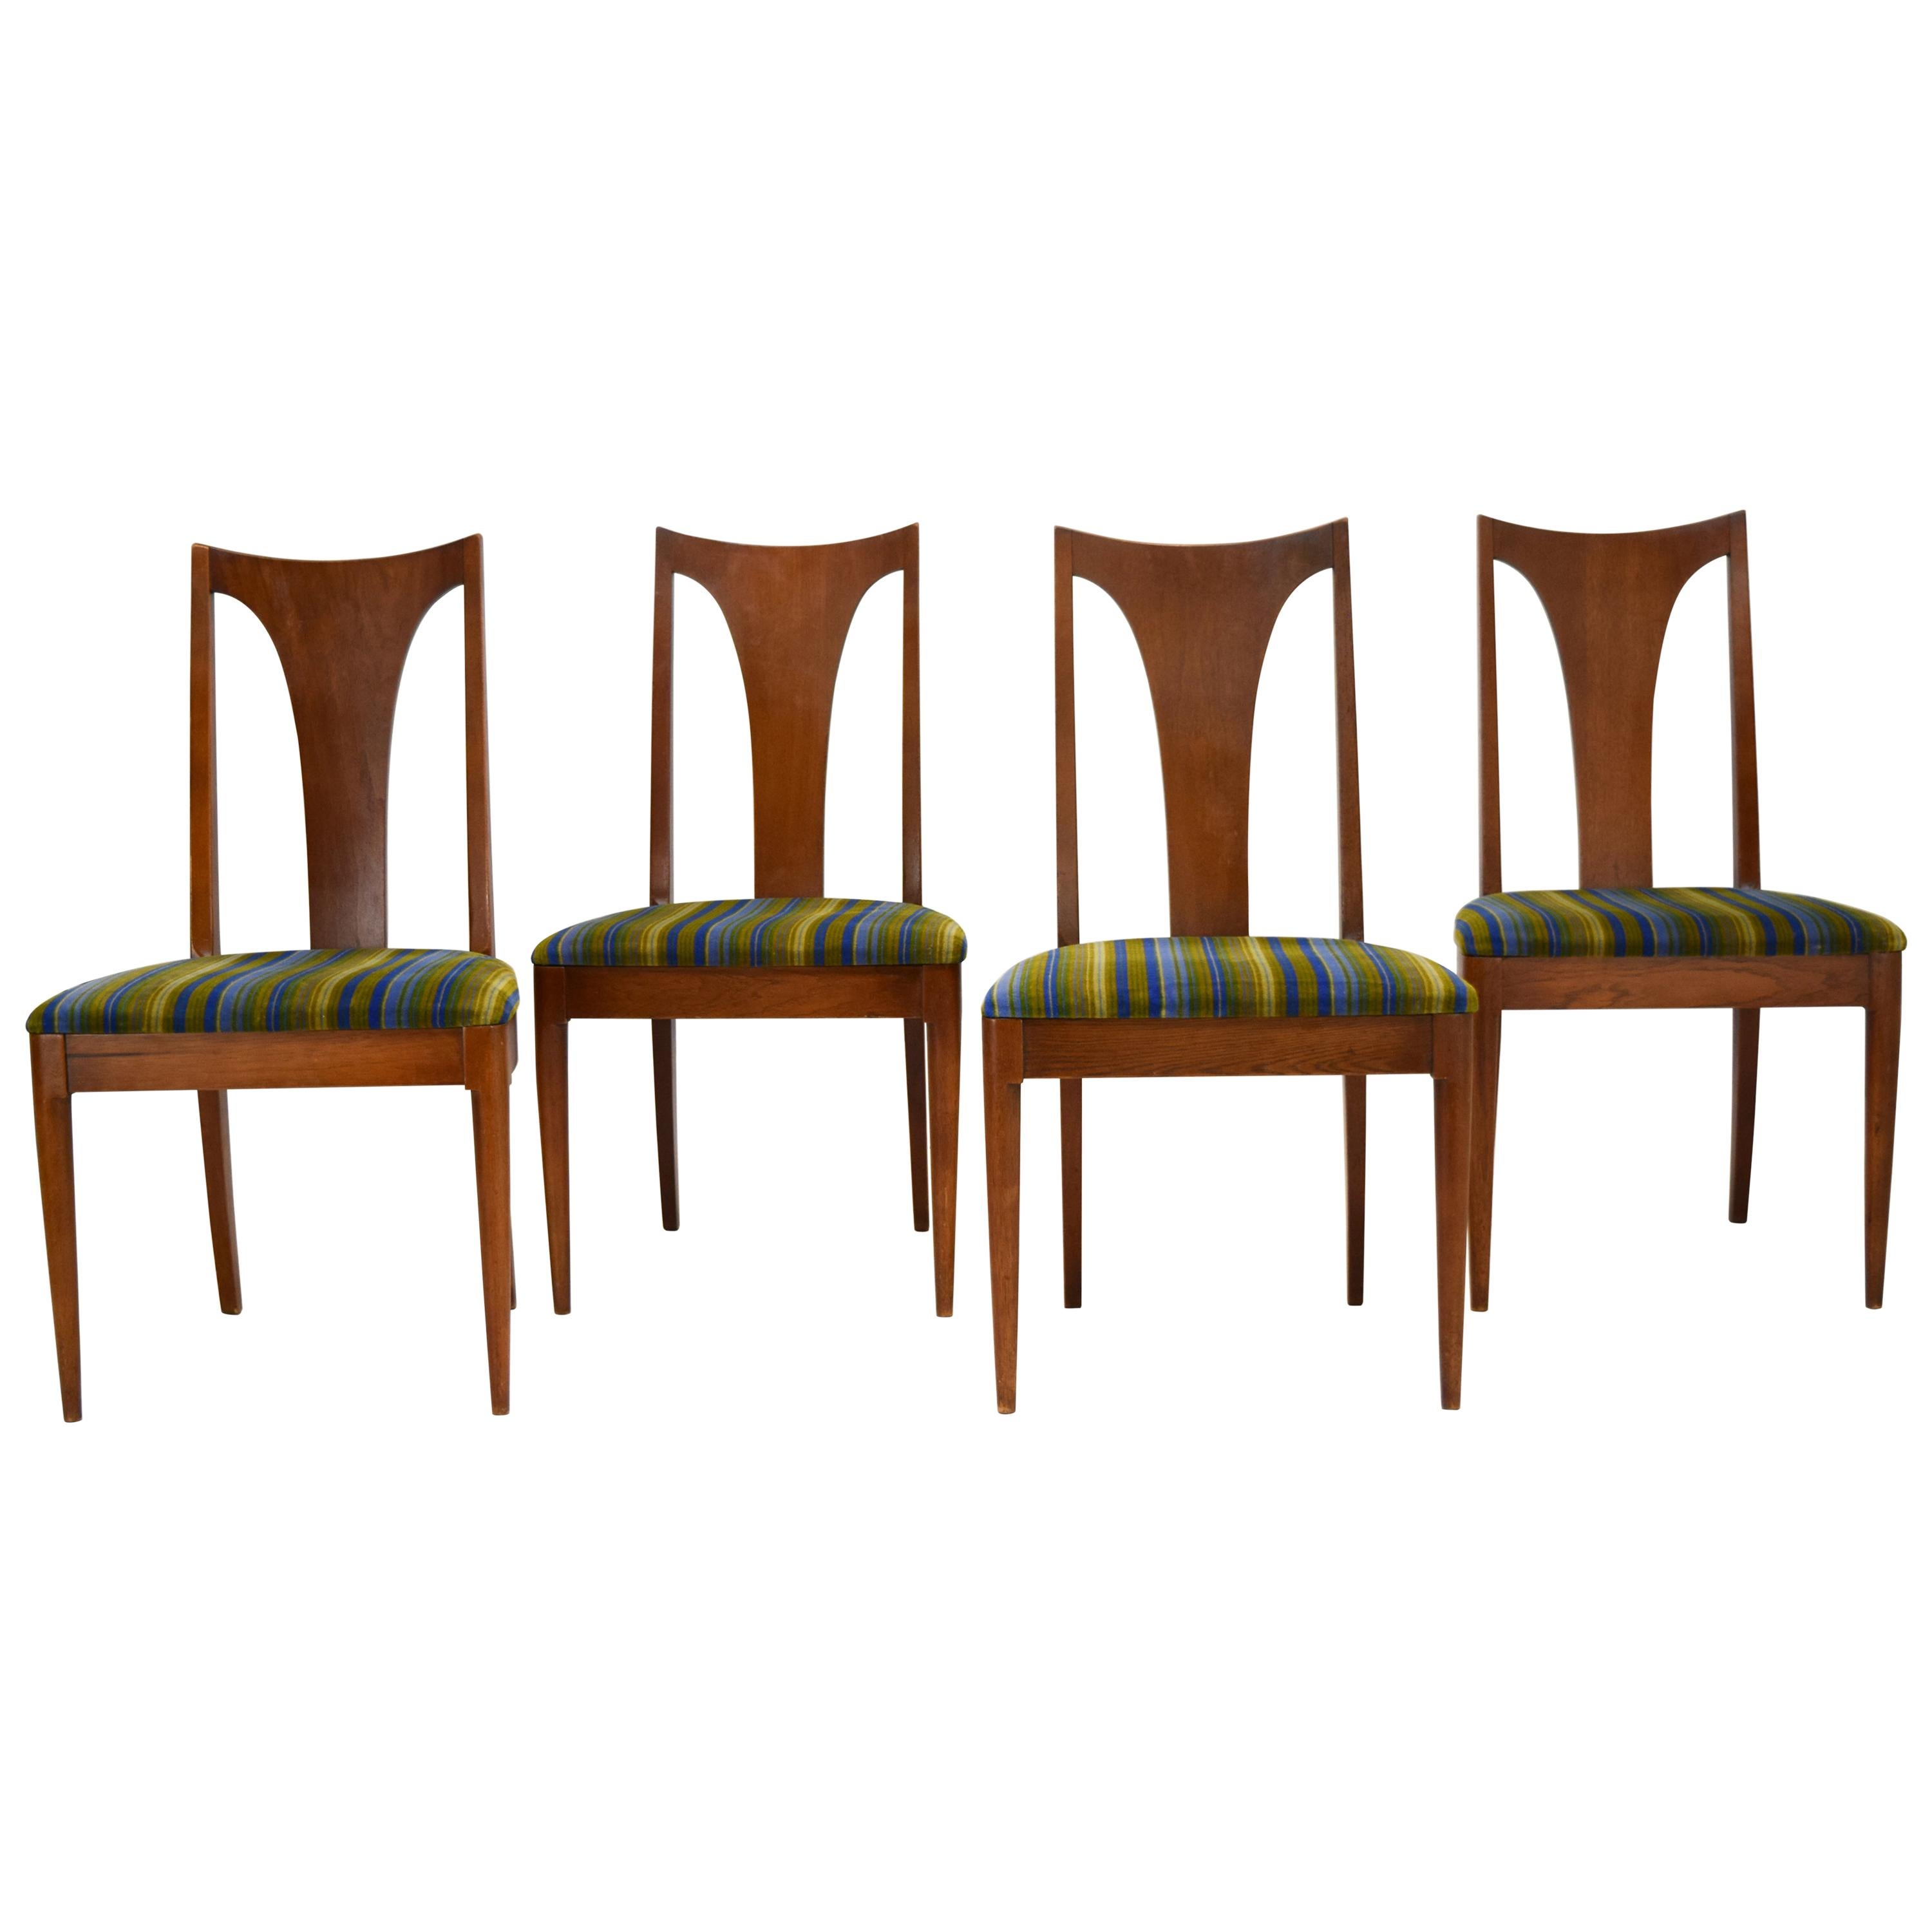 Set of 4 Dining Chairs by Broyhill for Saga